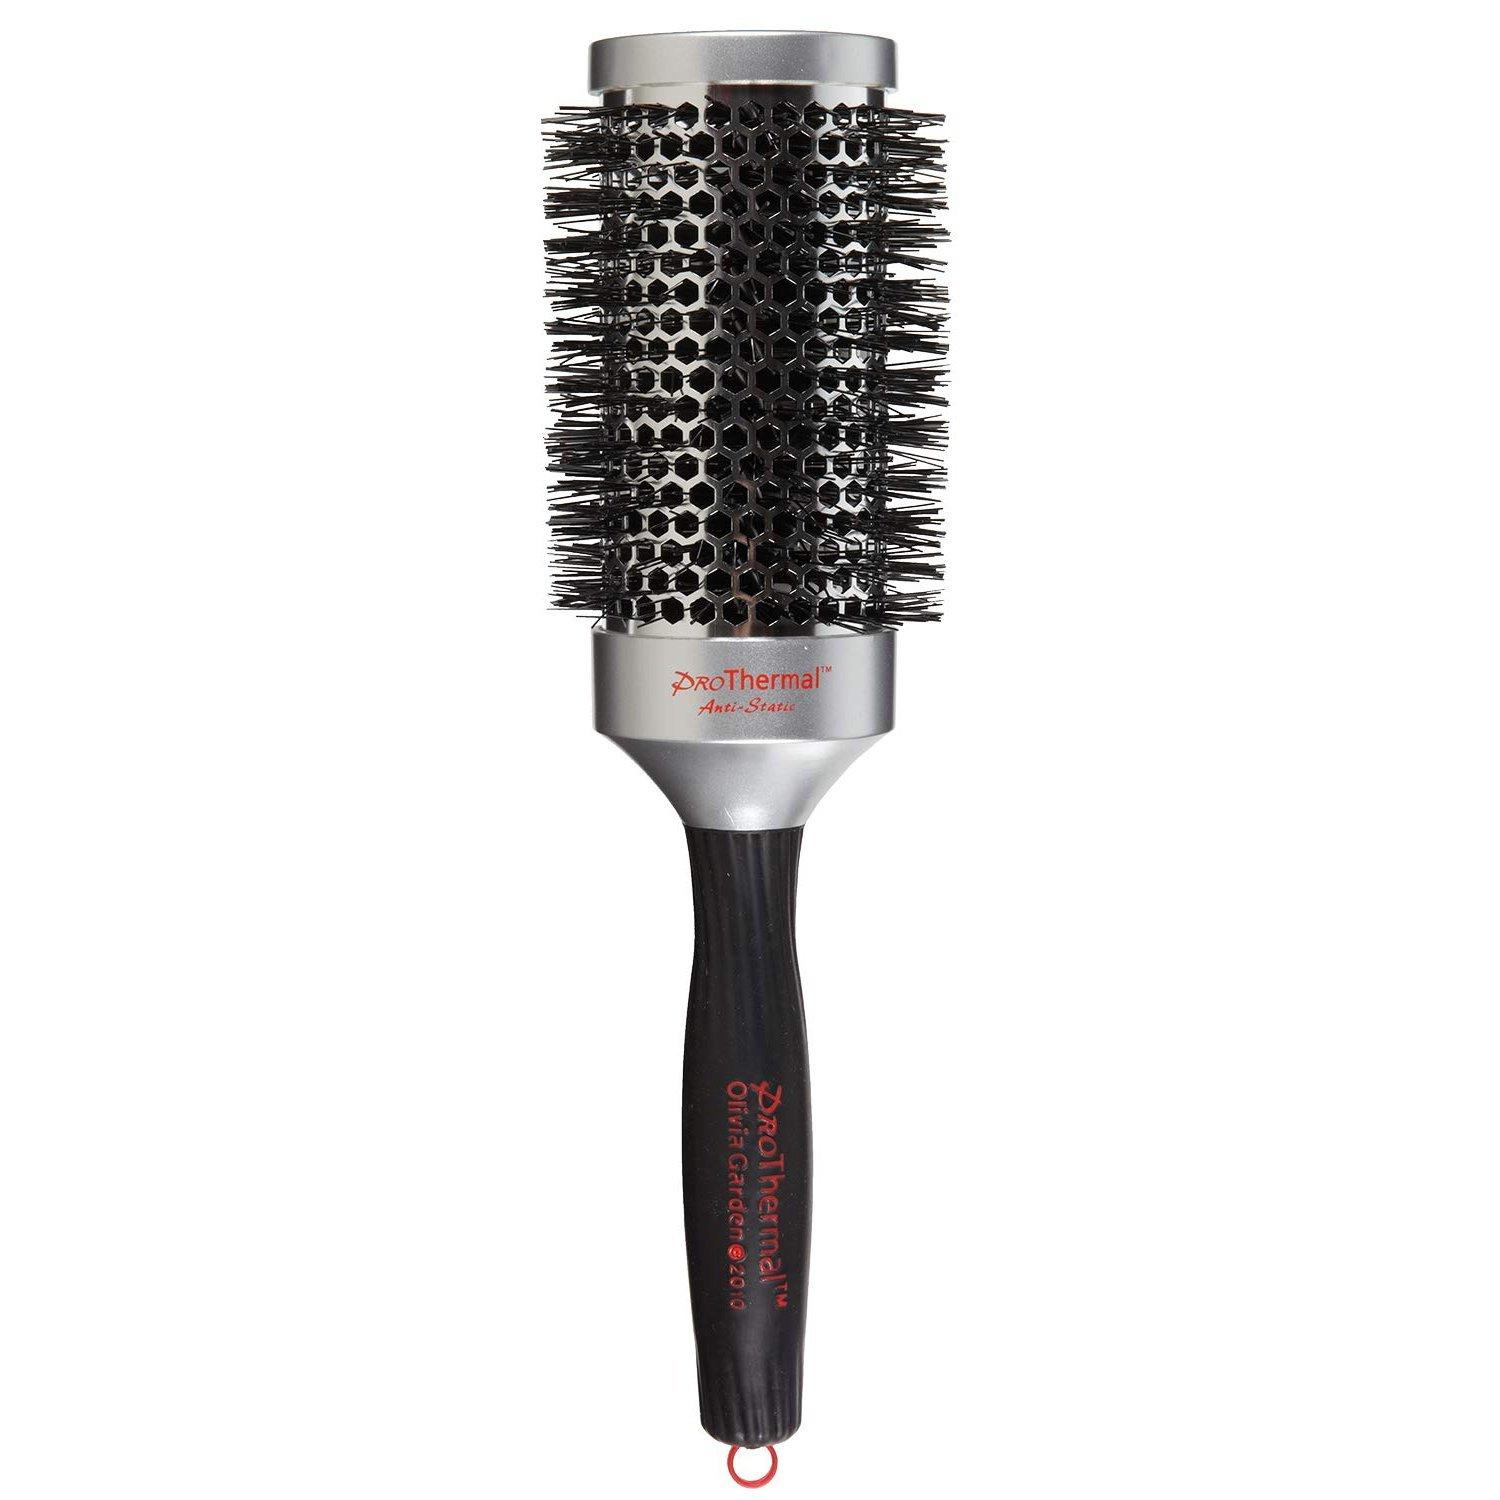 T-53 | 2 1/4" | ProThermal Anti-Static Collection COMBS & BRUSHES OLIVIA GARDEN 